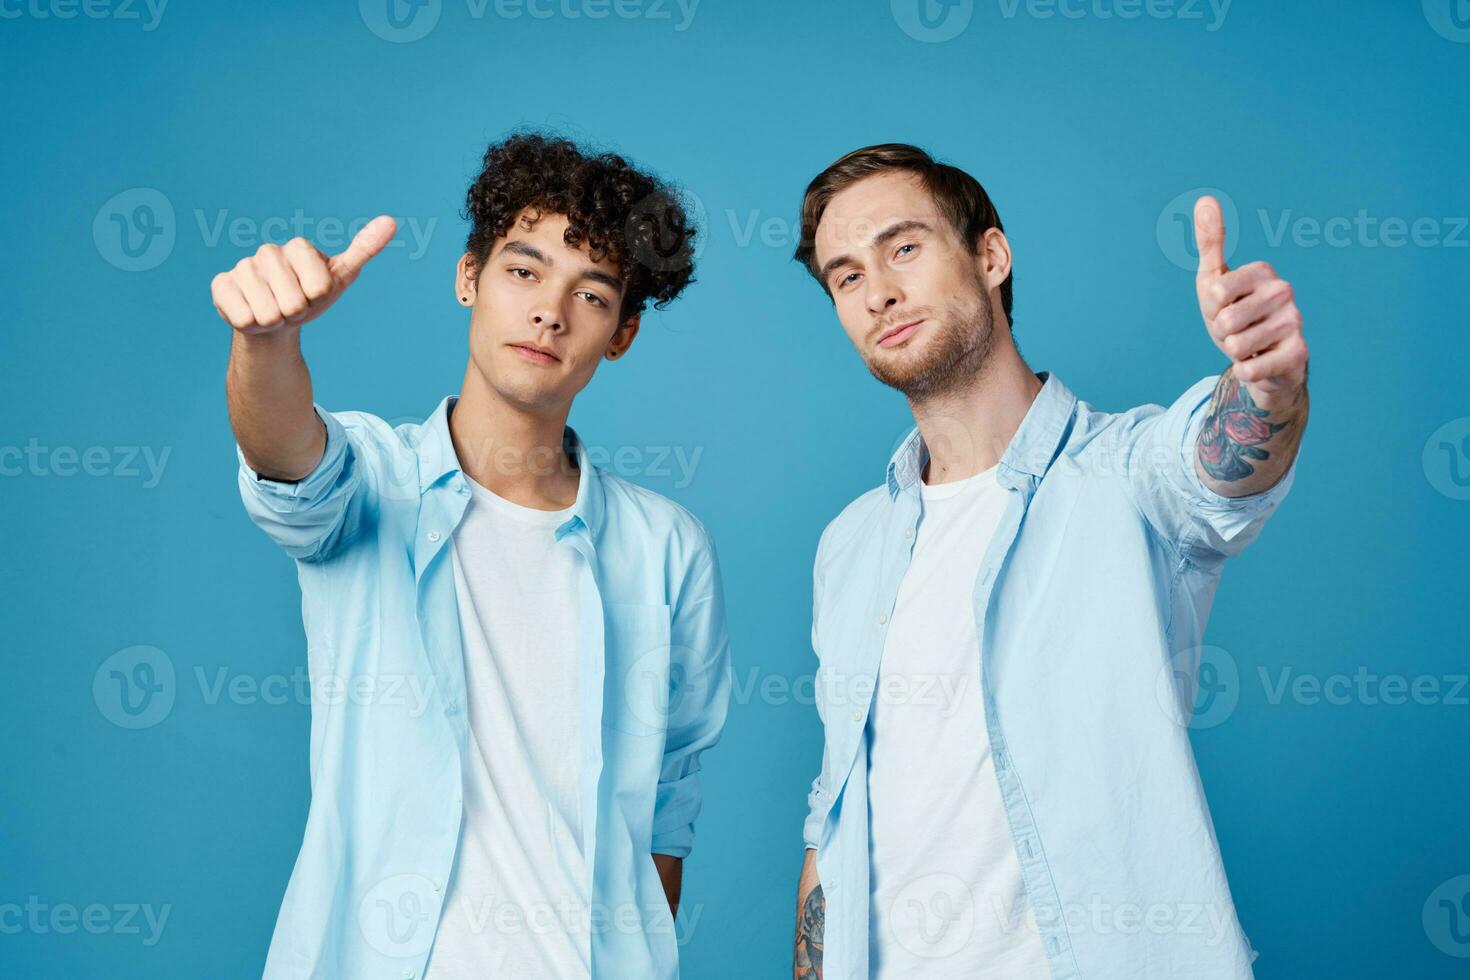 young guys in the same shirts and t-shirts are gesturing with their hands on a blue background friends photo